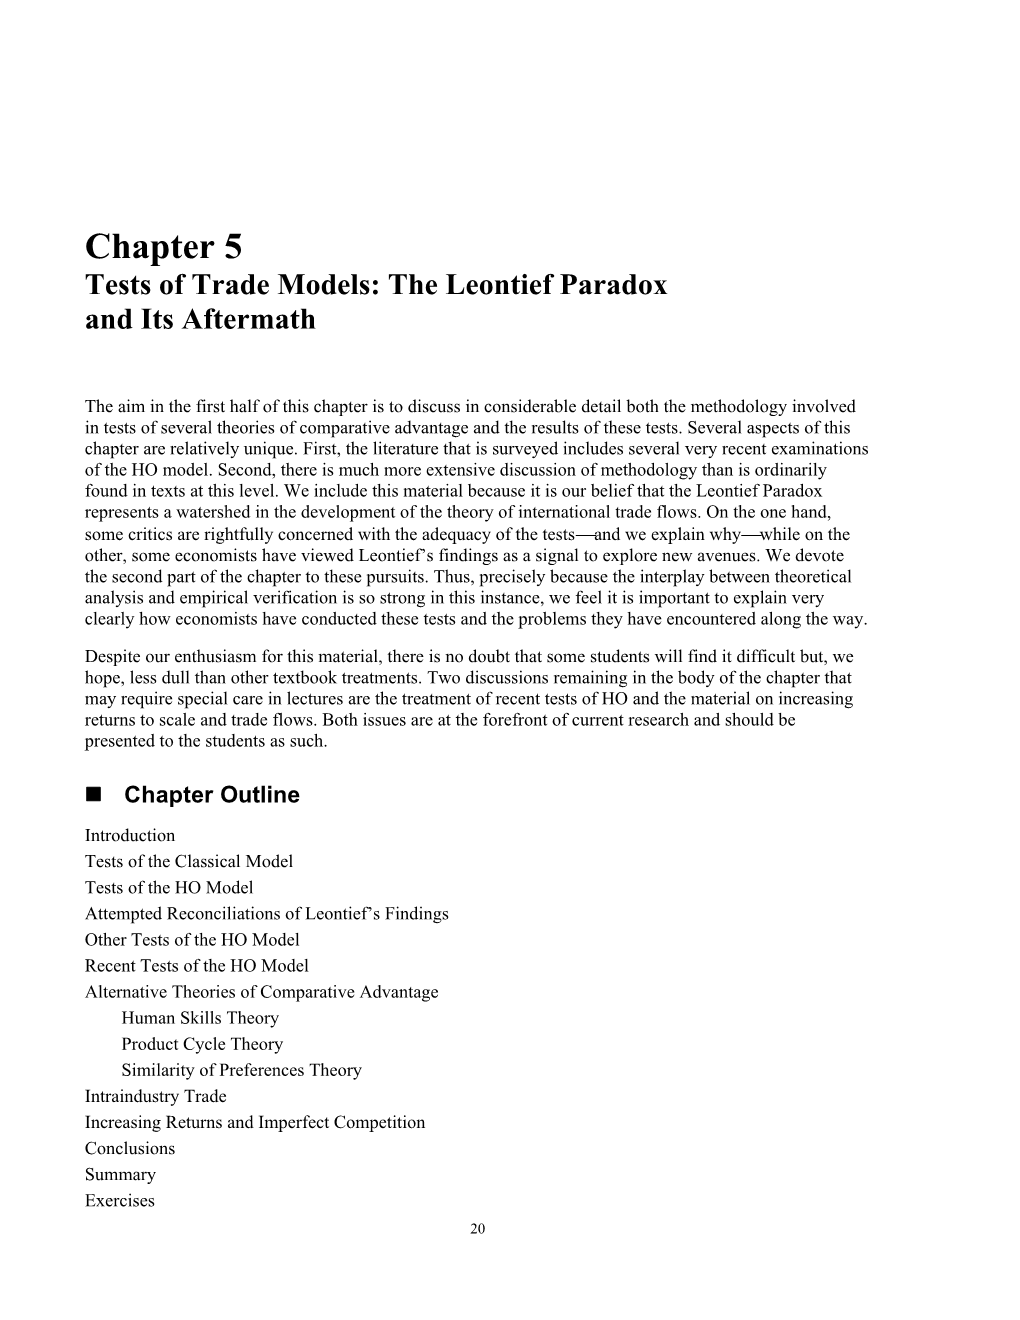 Chapter 5 Tests of Trade Models: the Leontief Paradox and Its Aftermath 1